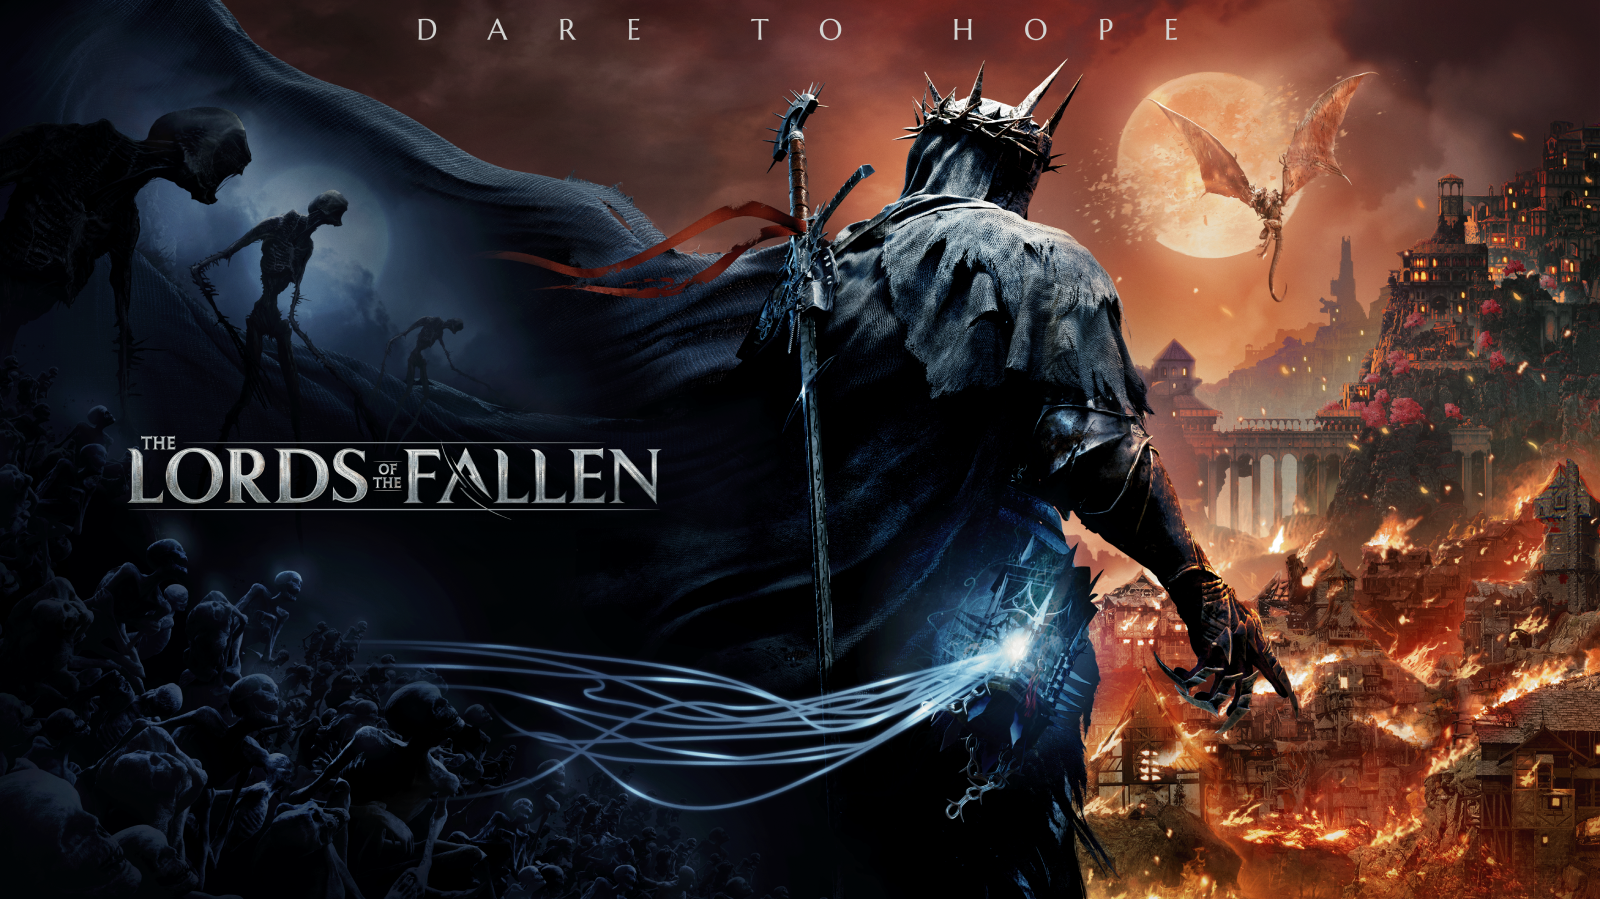 A Lords of the Fallen technical showcase trailer has been released